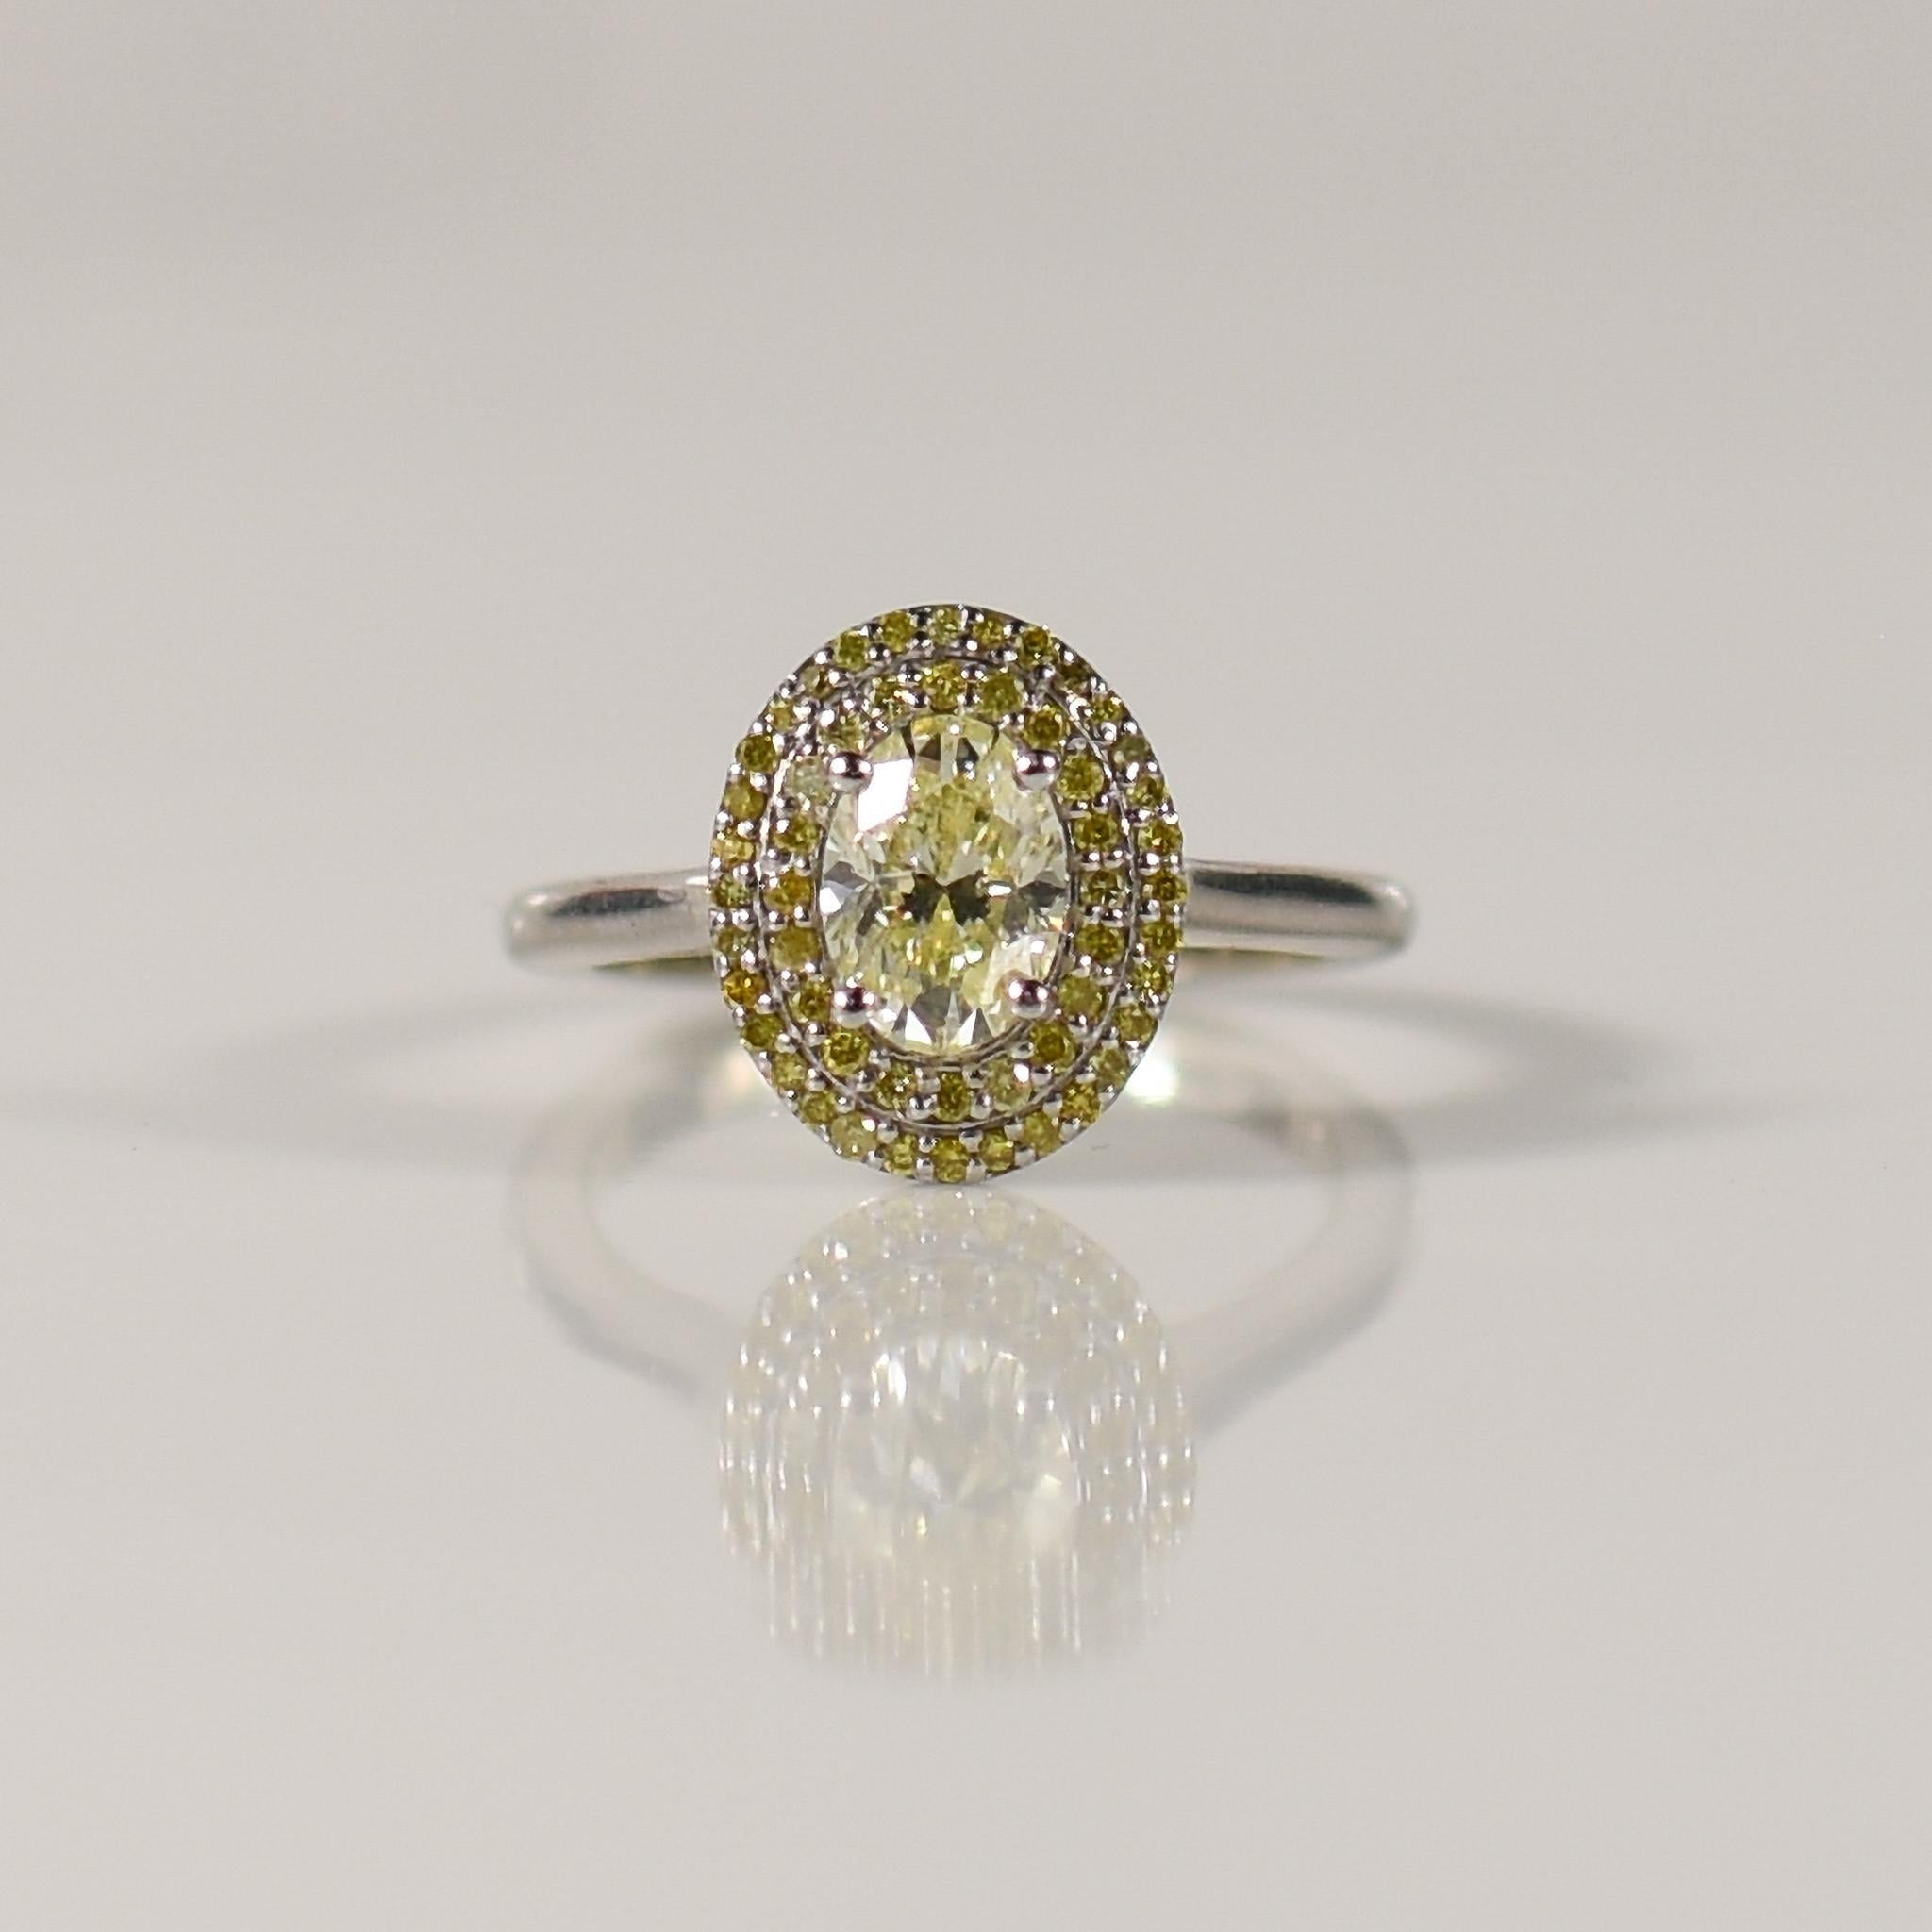 Step into the enchanting world of vintage allure with this captivating oval brilliant cut diamond ring. The centerpiece of this exquisite piece is a dazzling 1.01 carat oval diamond, exuding timeless sophistication and brilliance. Surrounding the